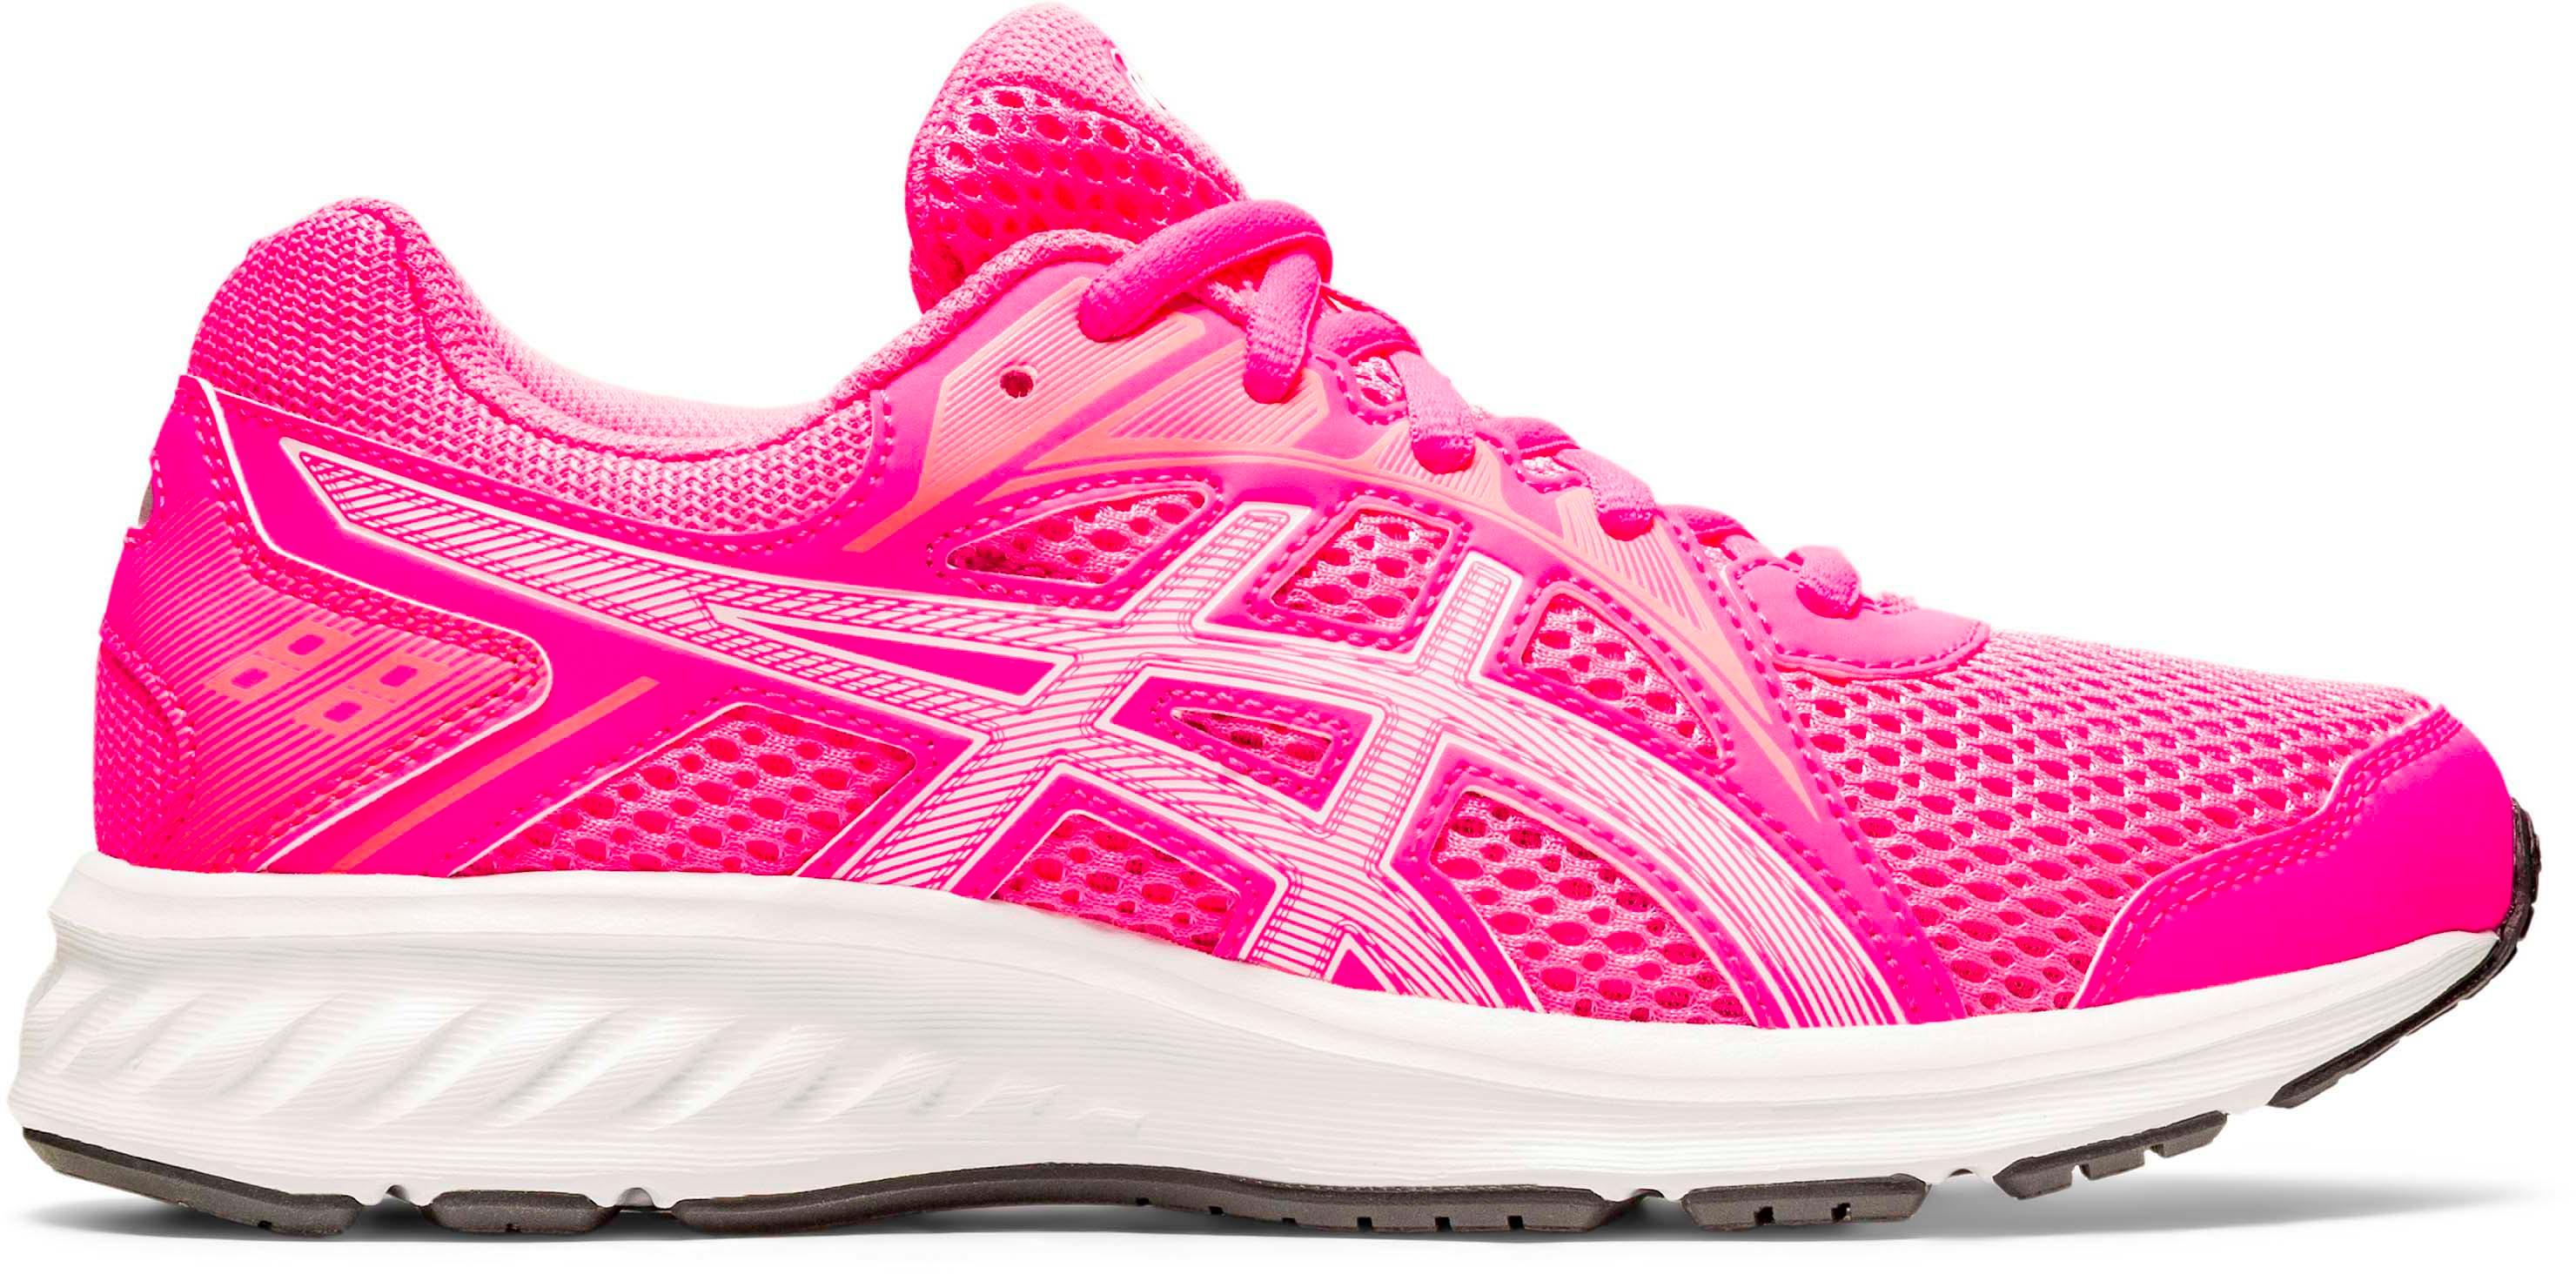 AJF.asics neon pink running shoes,OFF 50% - www.concordehotels.com.tr